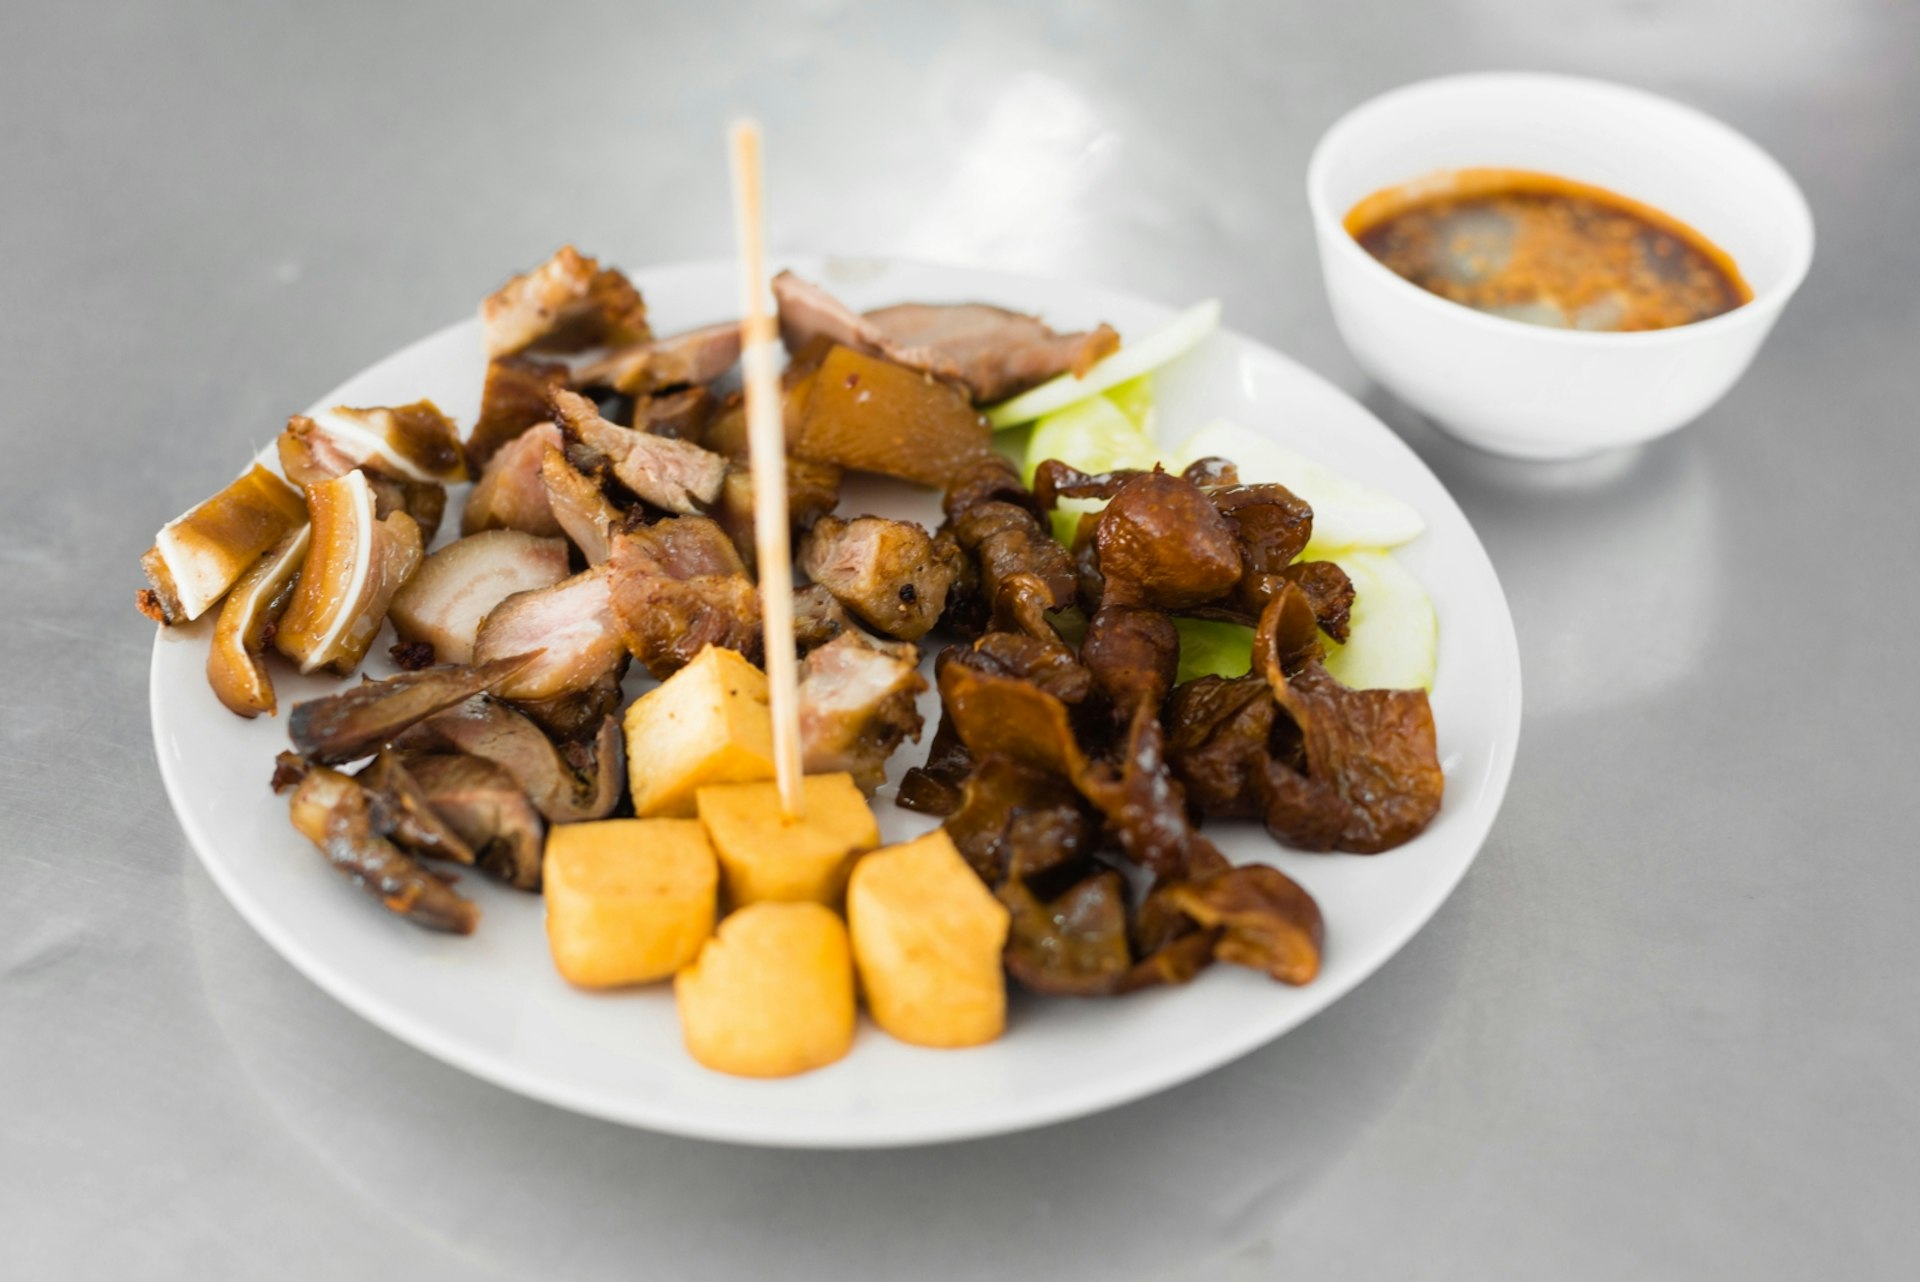 Loba is a Phuket favourite, typically made with pork offal © Austin Bush / Lonely Planet